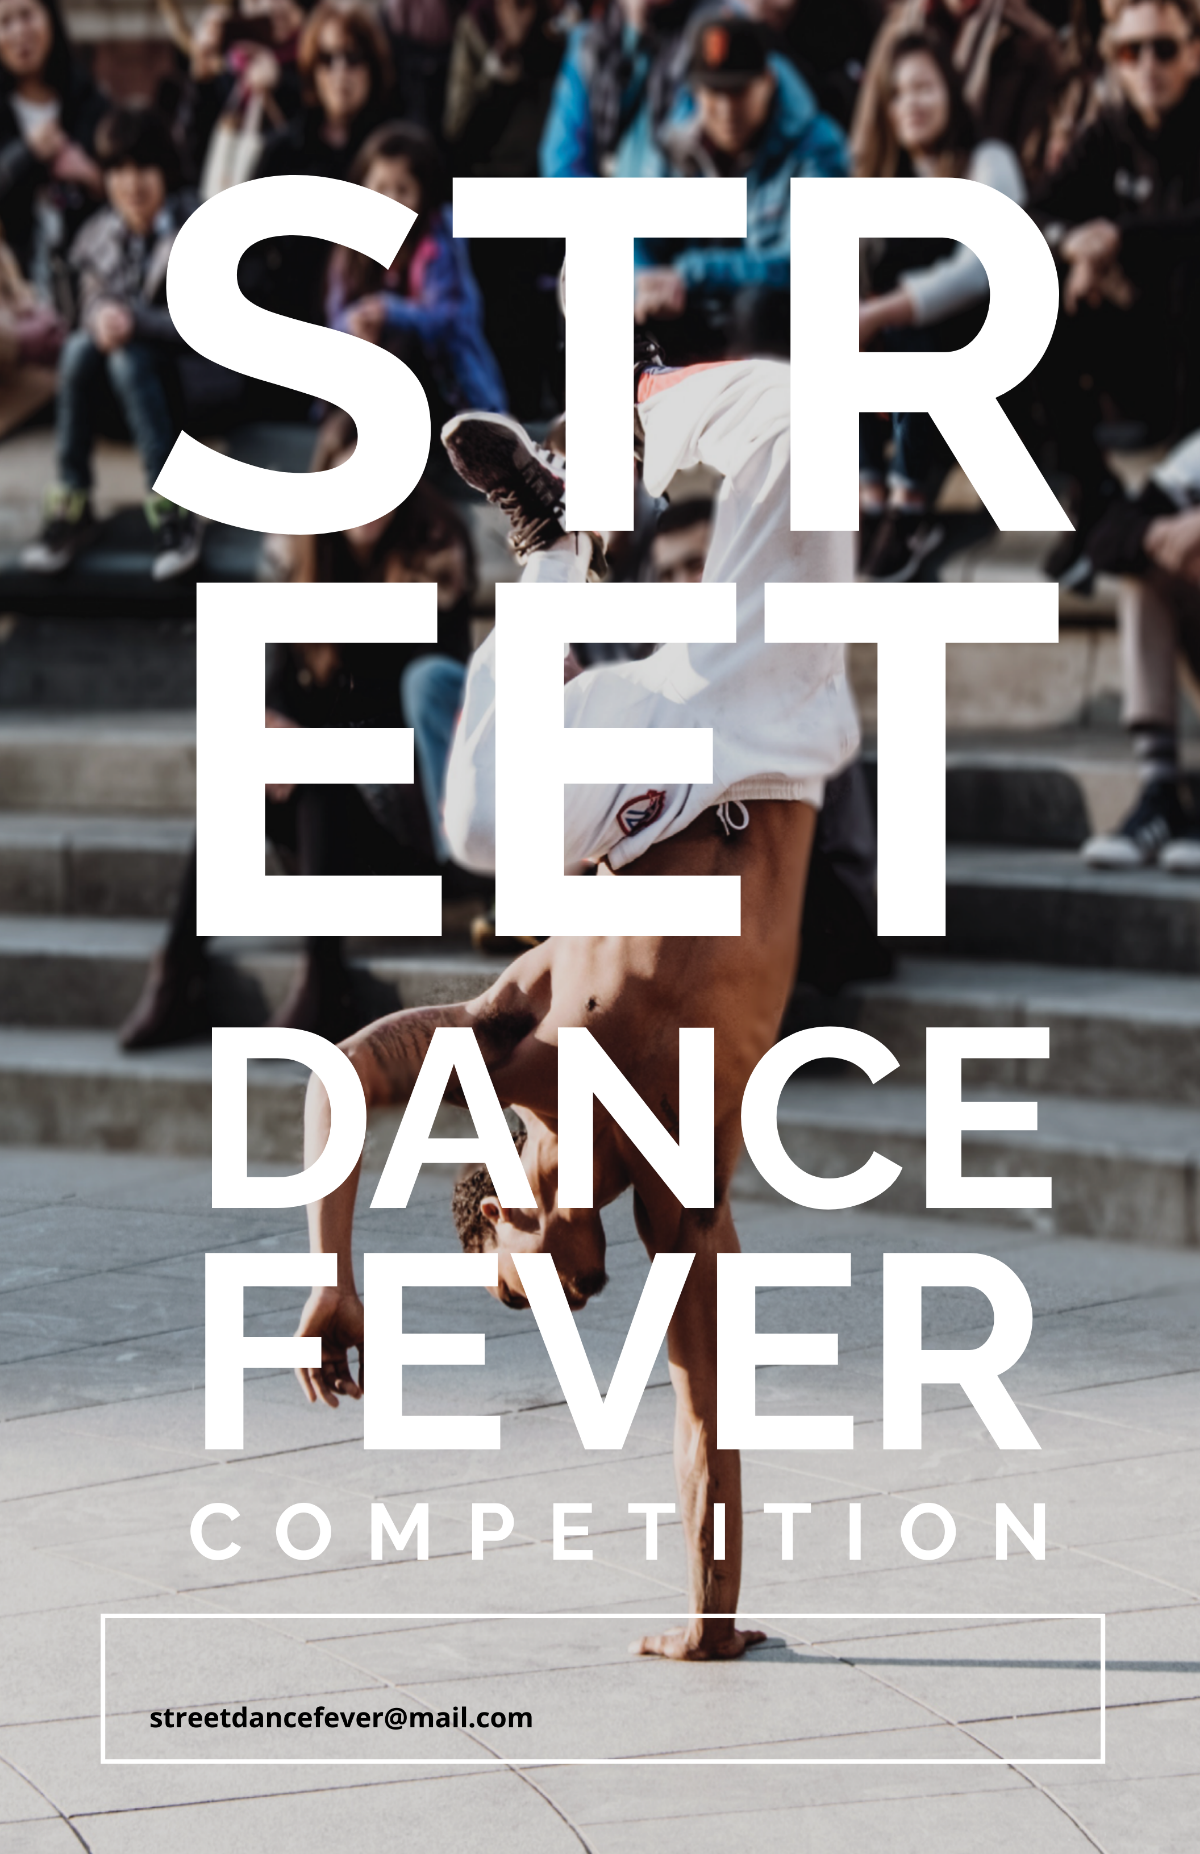 Free Dance Poster Template